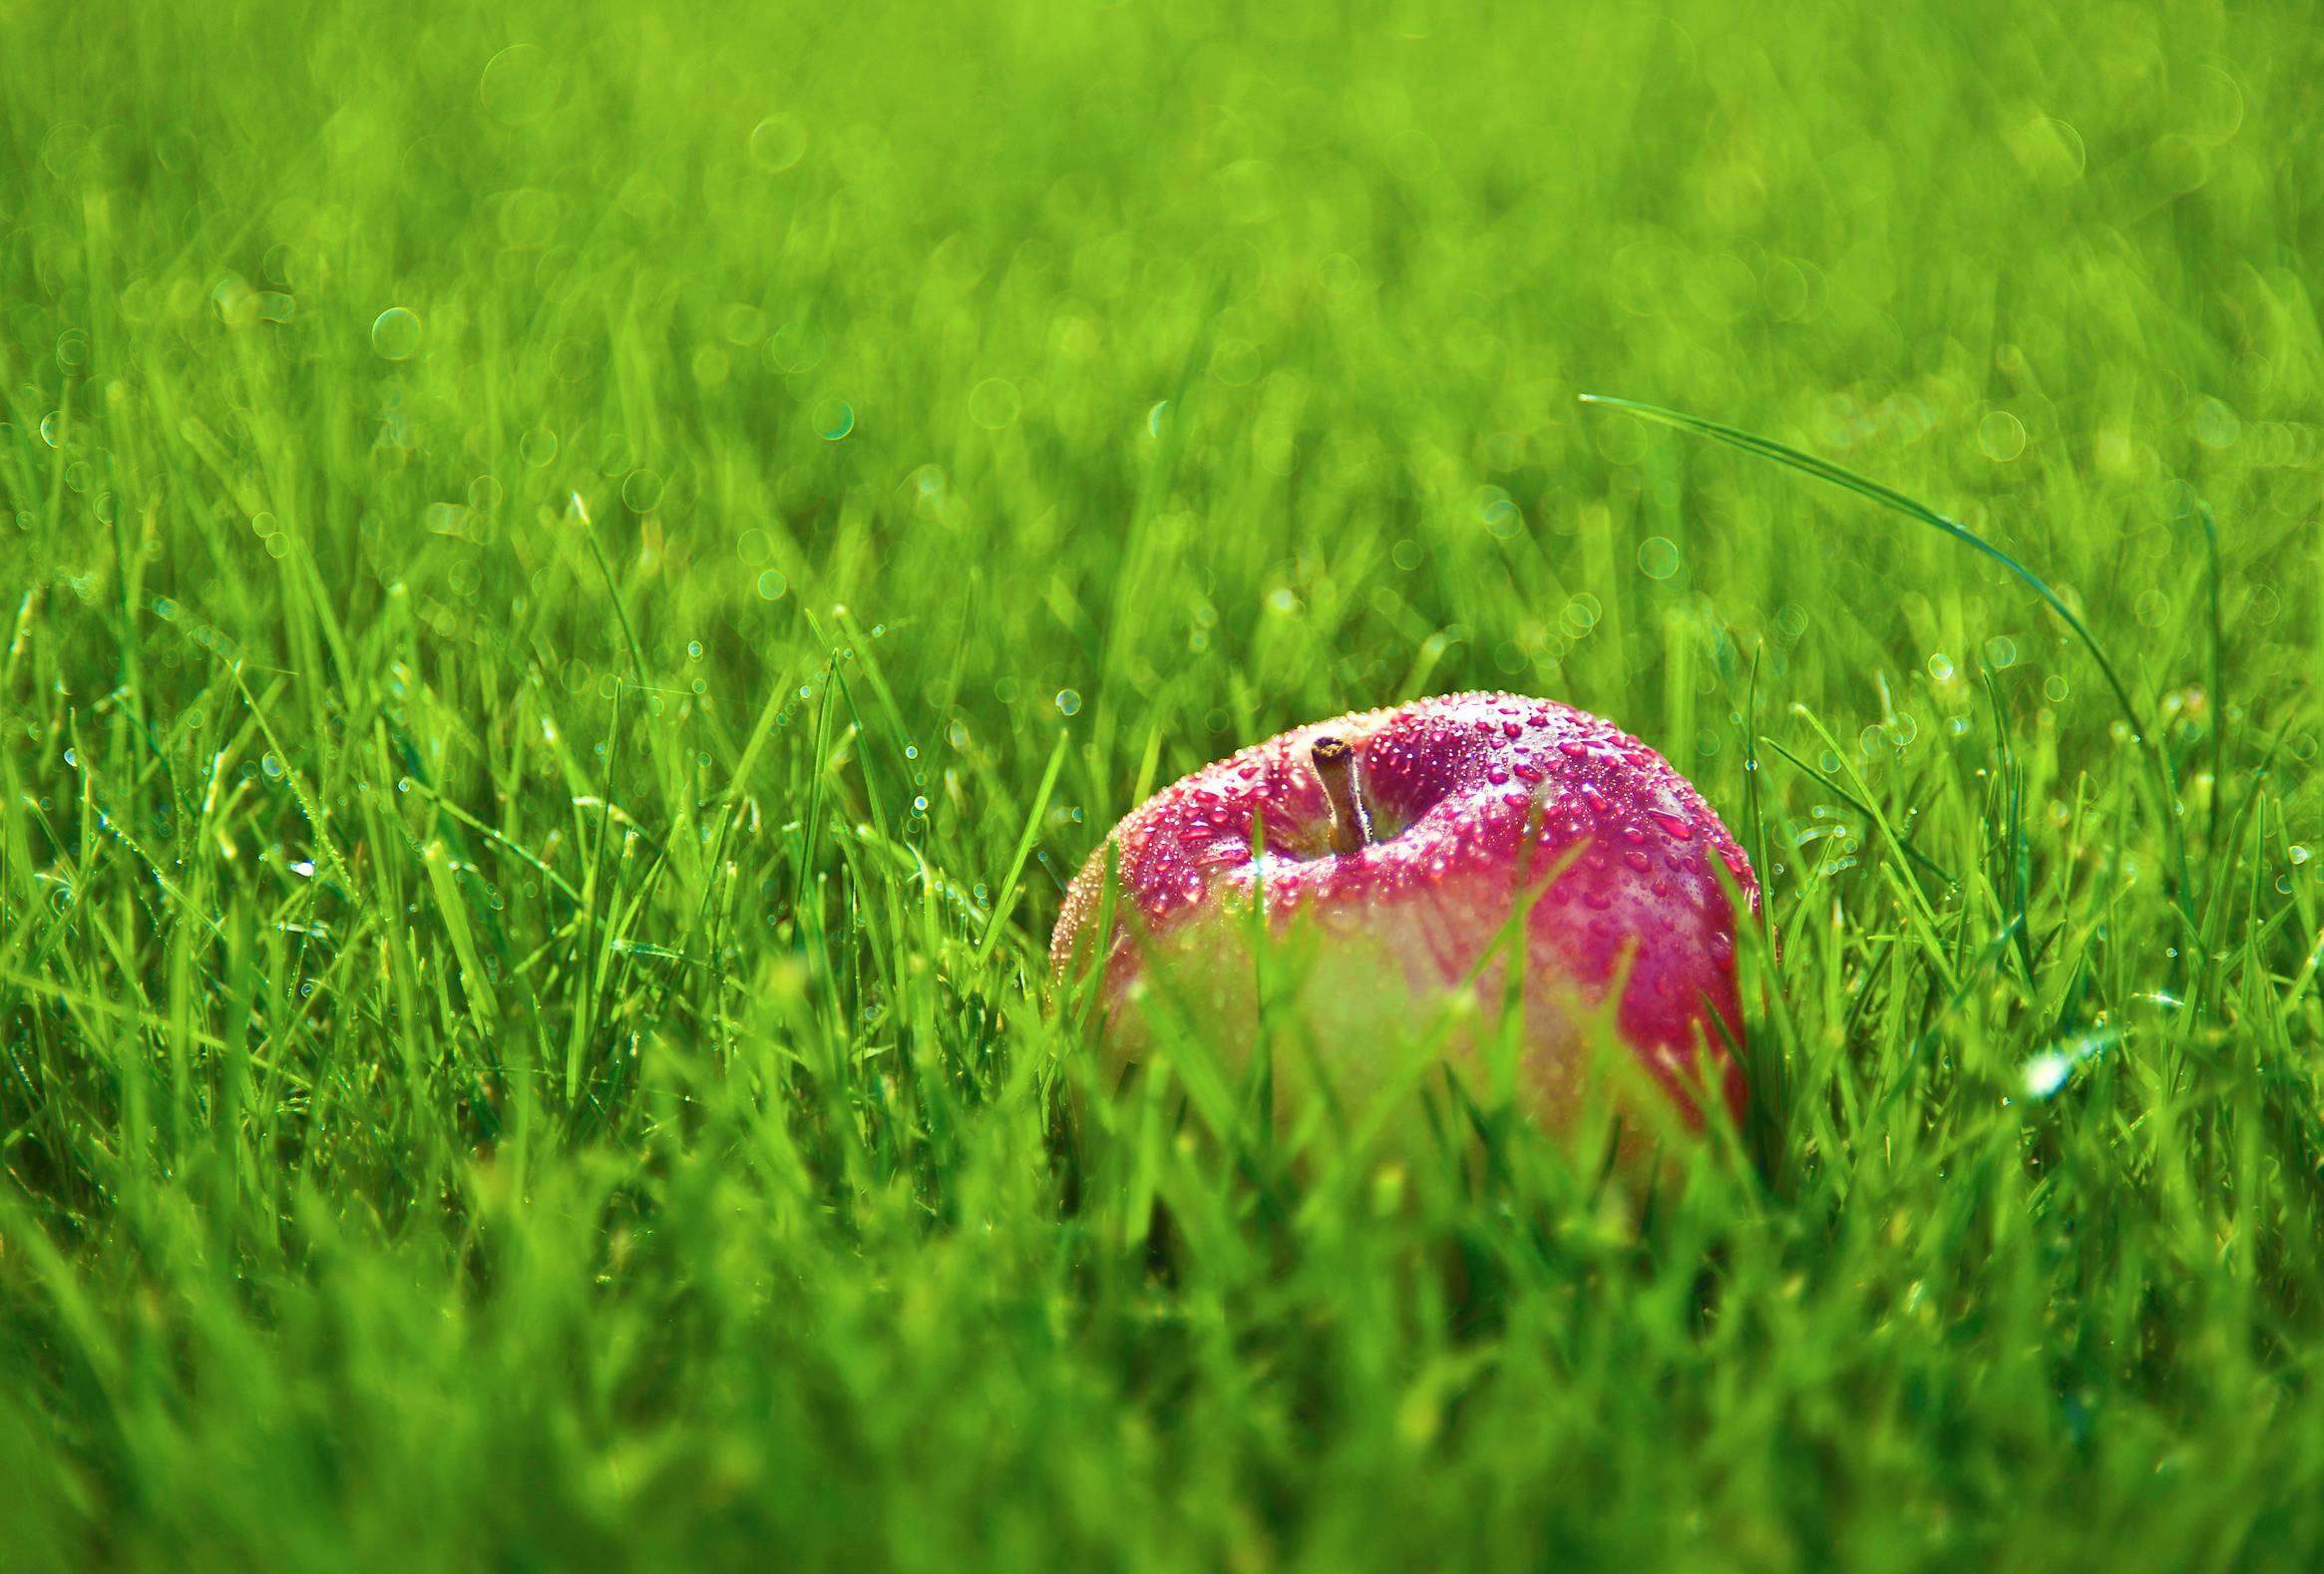 Red Apple On Green Grass